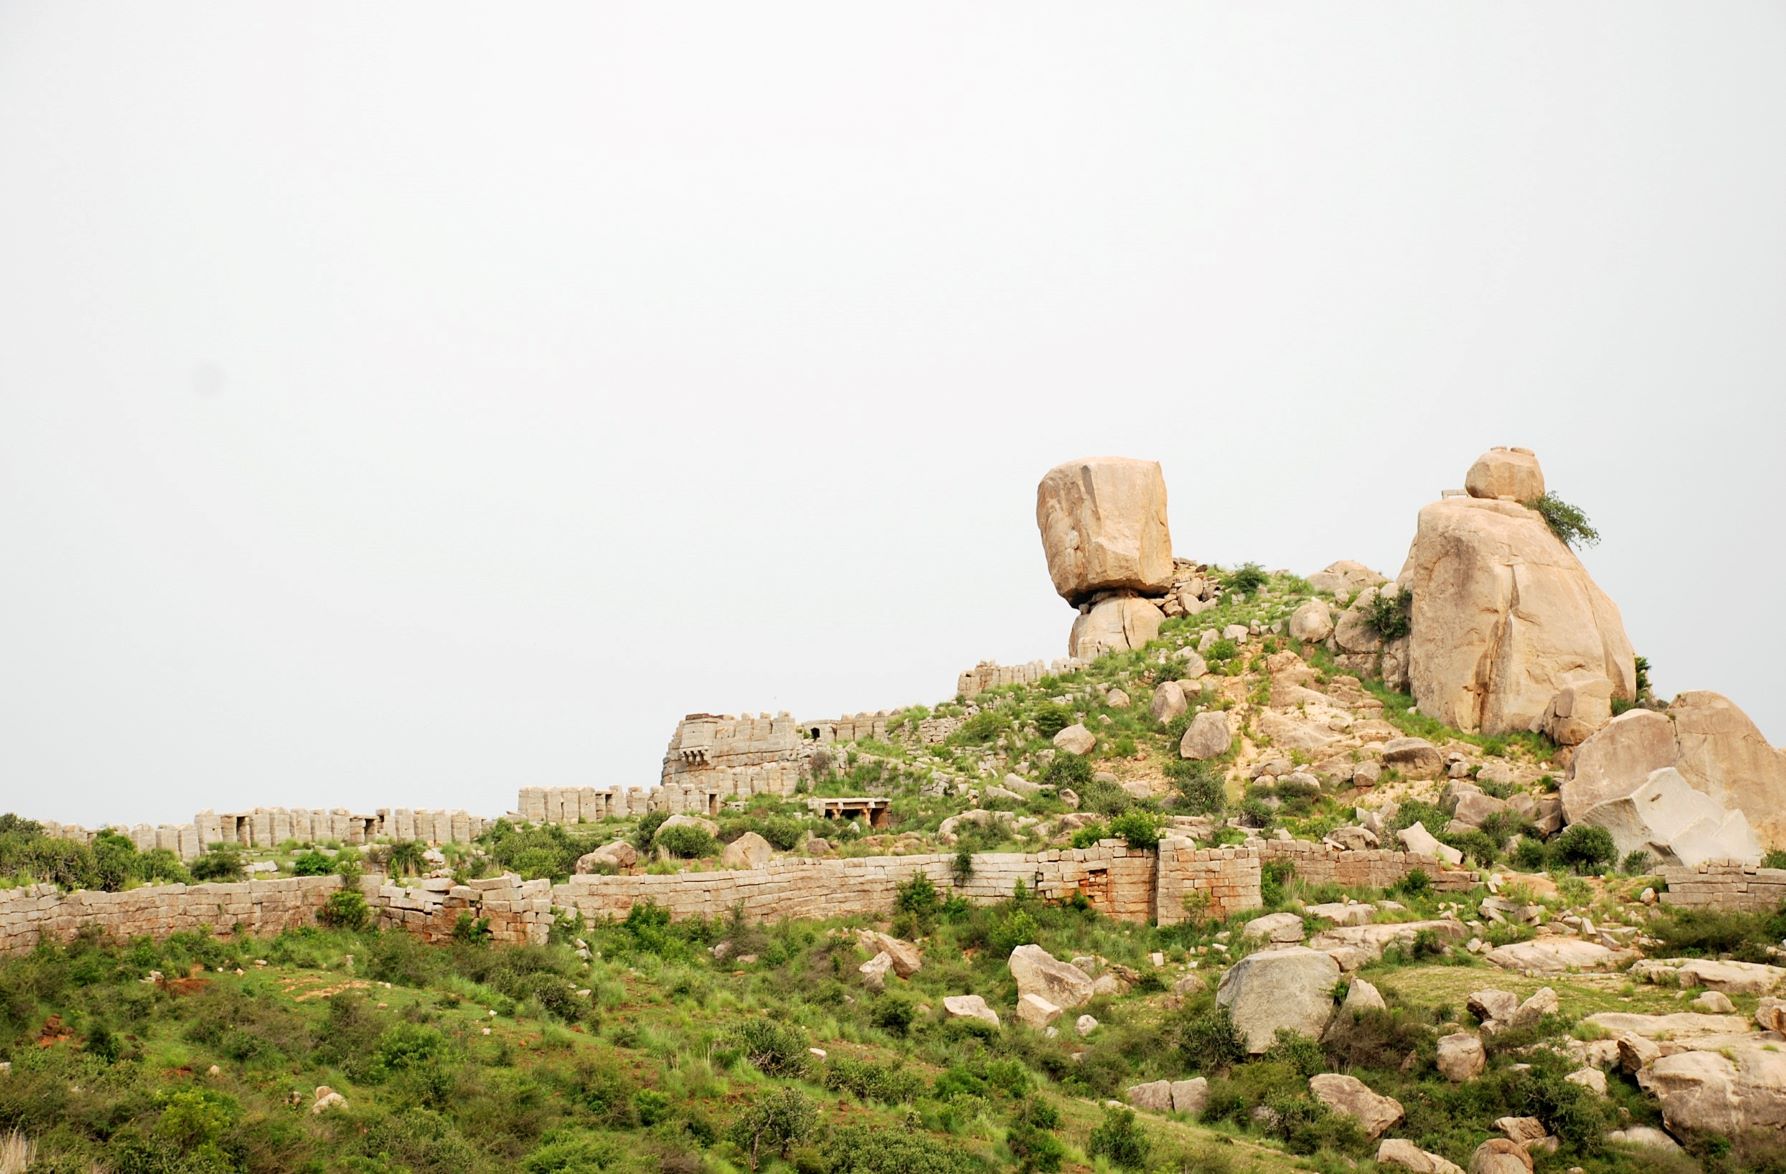 A view of the rocky outcrop and stone defense wall, Image Source: Archaeological Survey of India.